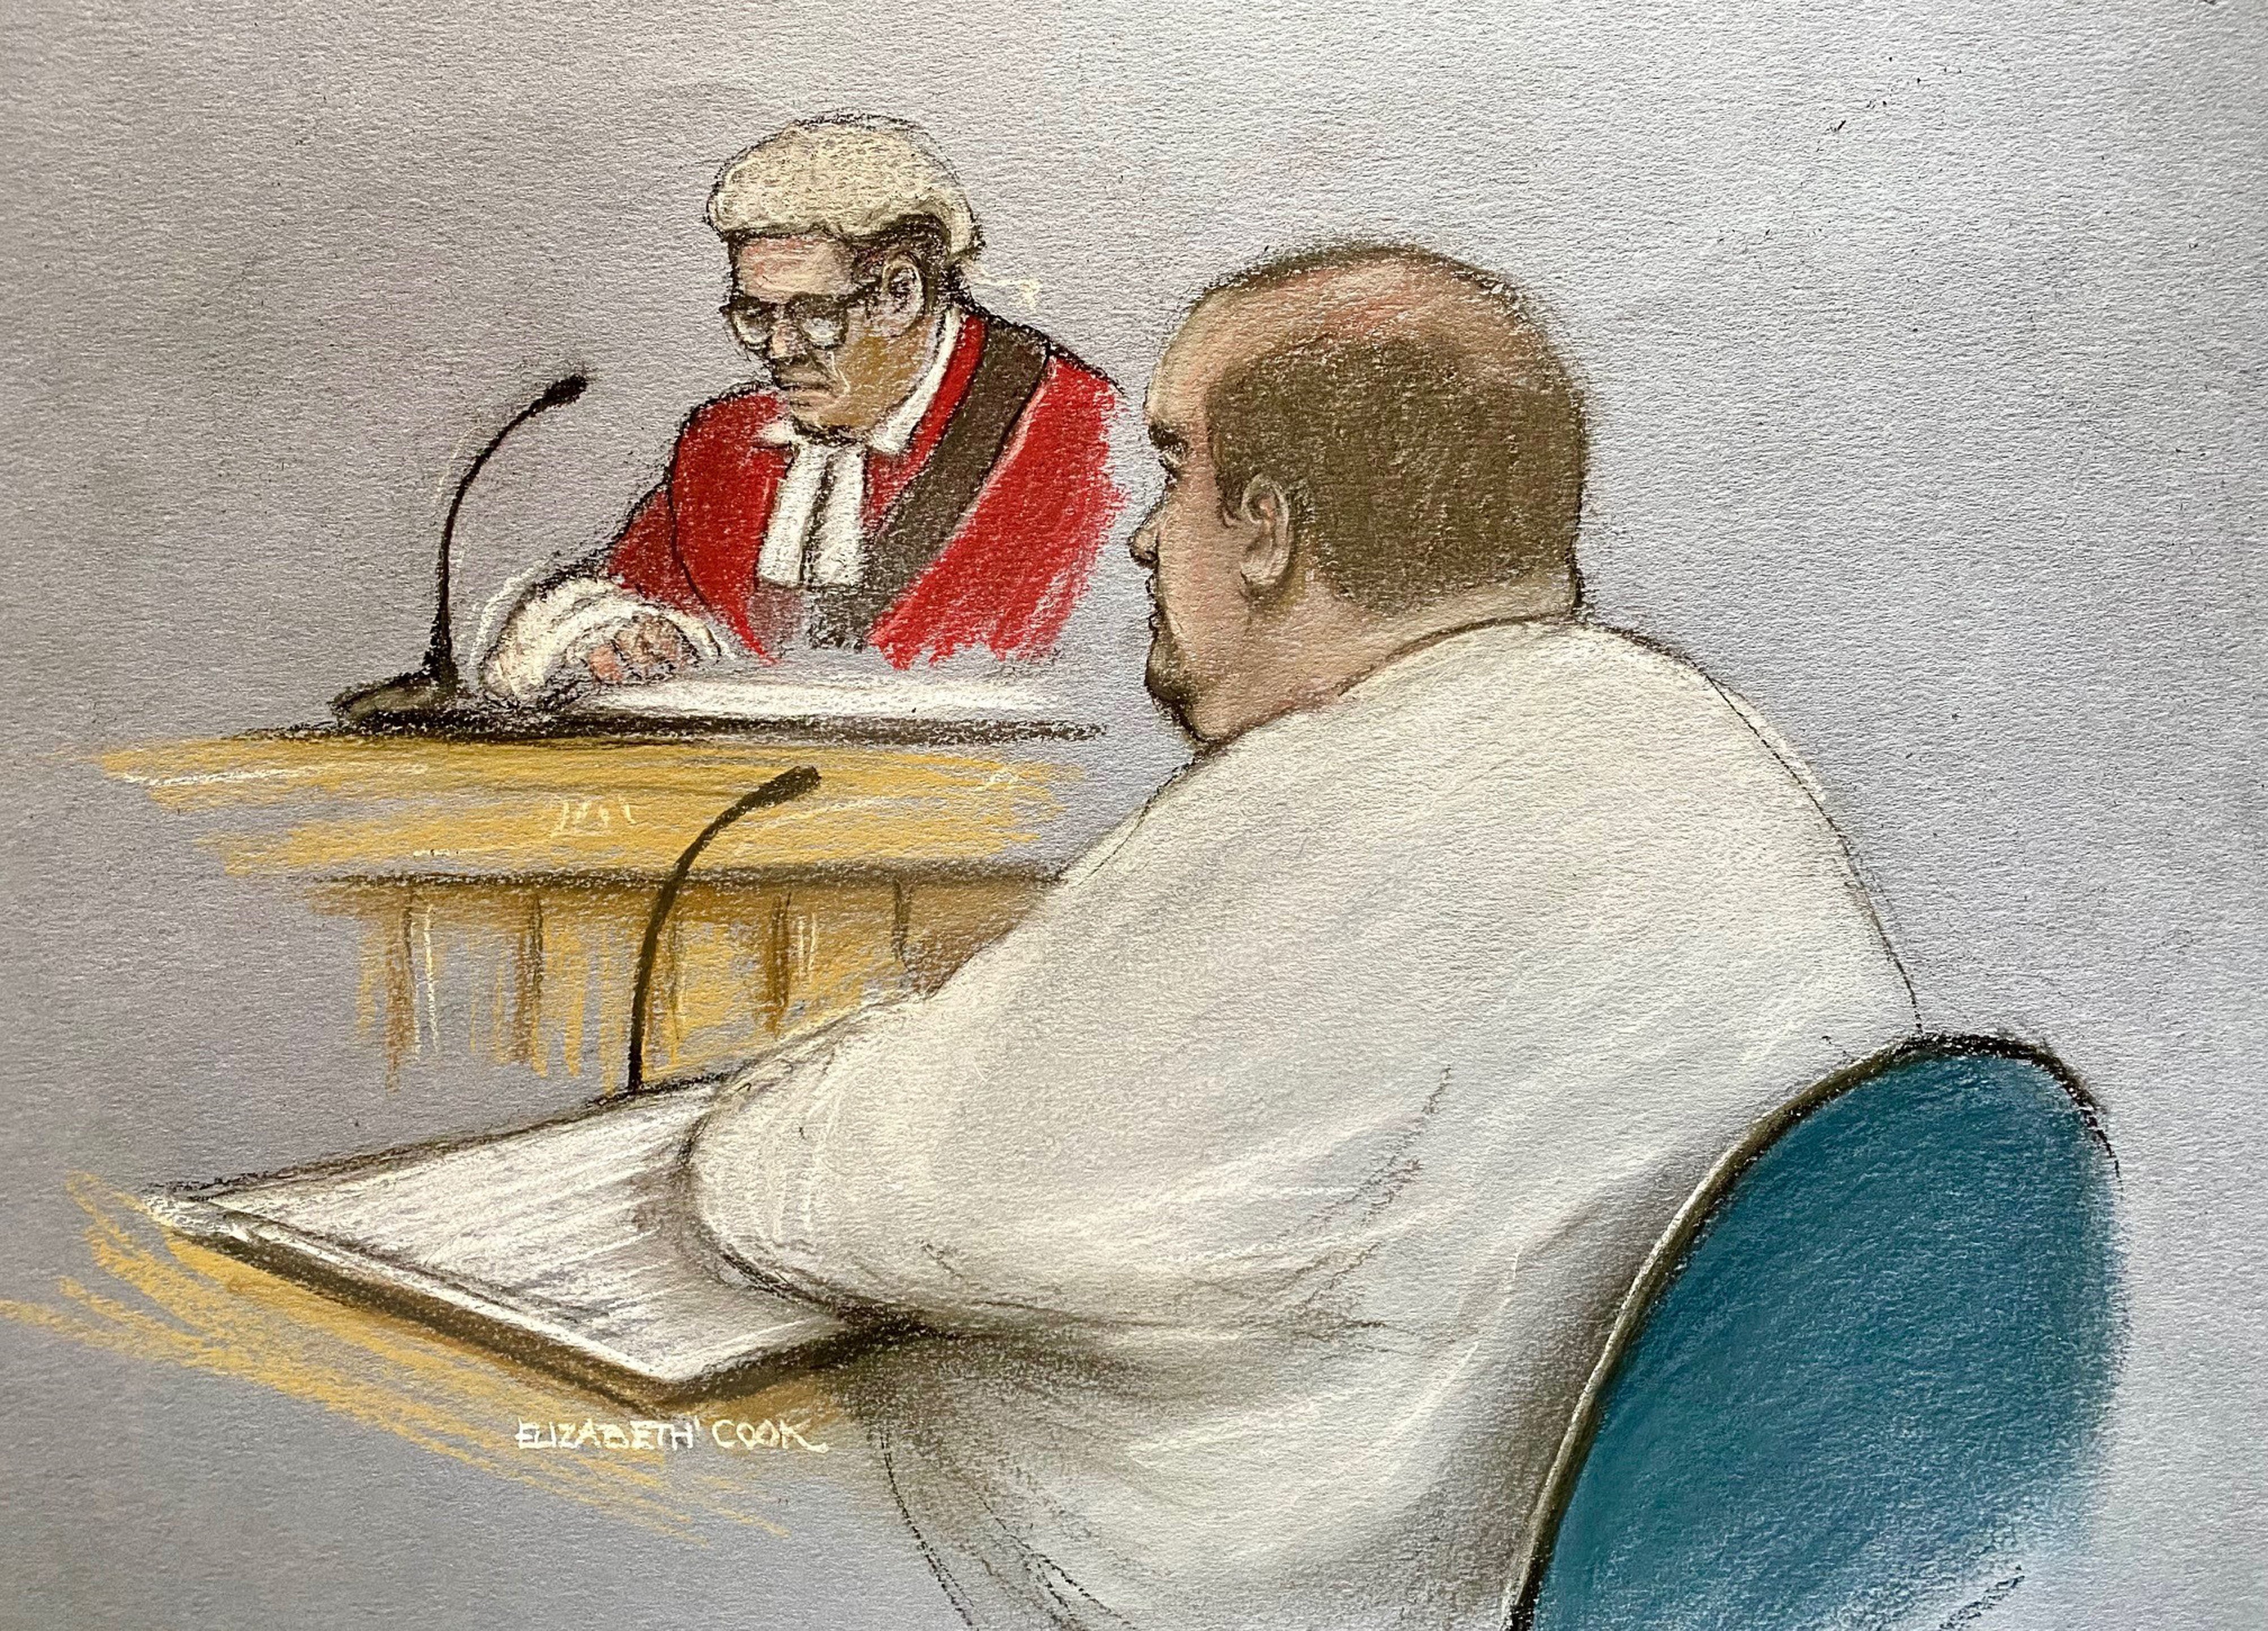 Gavin Plumb previously told jurors his alleged plans were a ‘fantasy’ (Elizabeth Cook/PA)